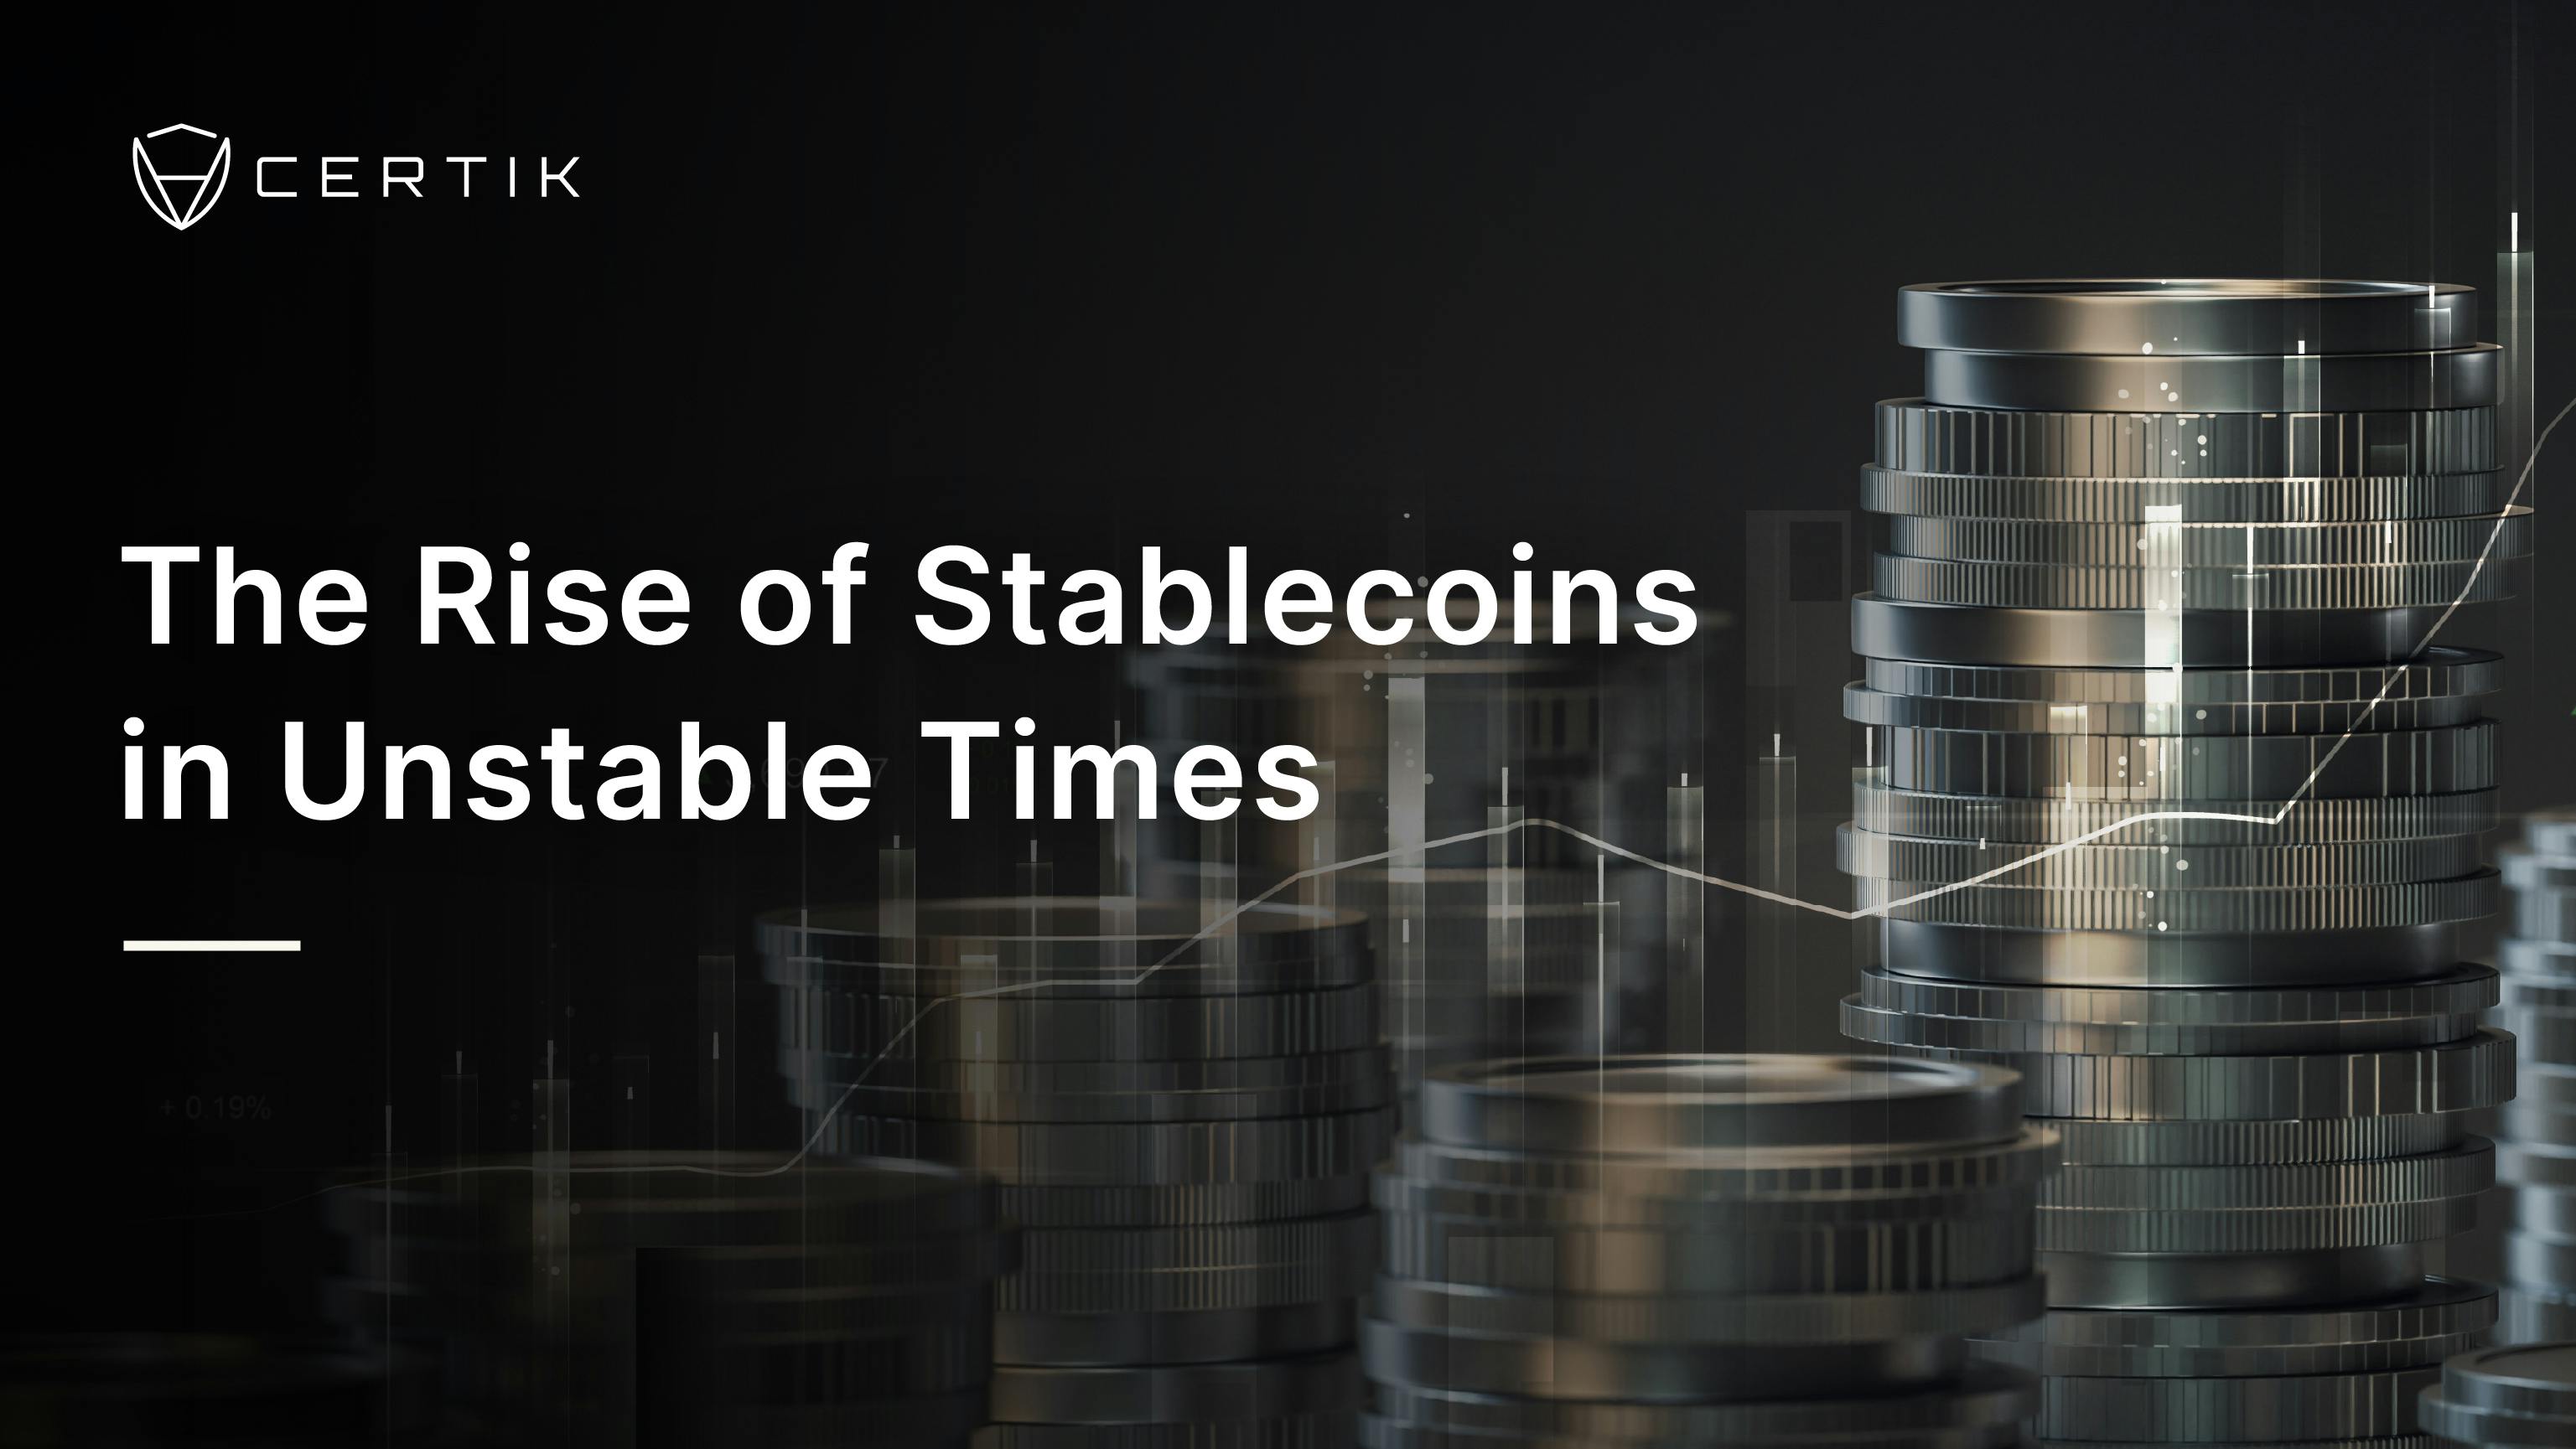 The Rise of Stablecoins in Unstable Times